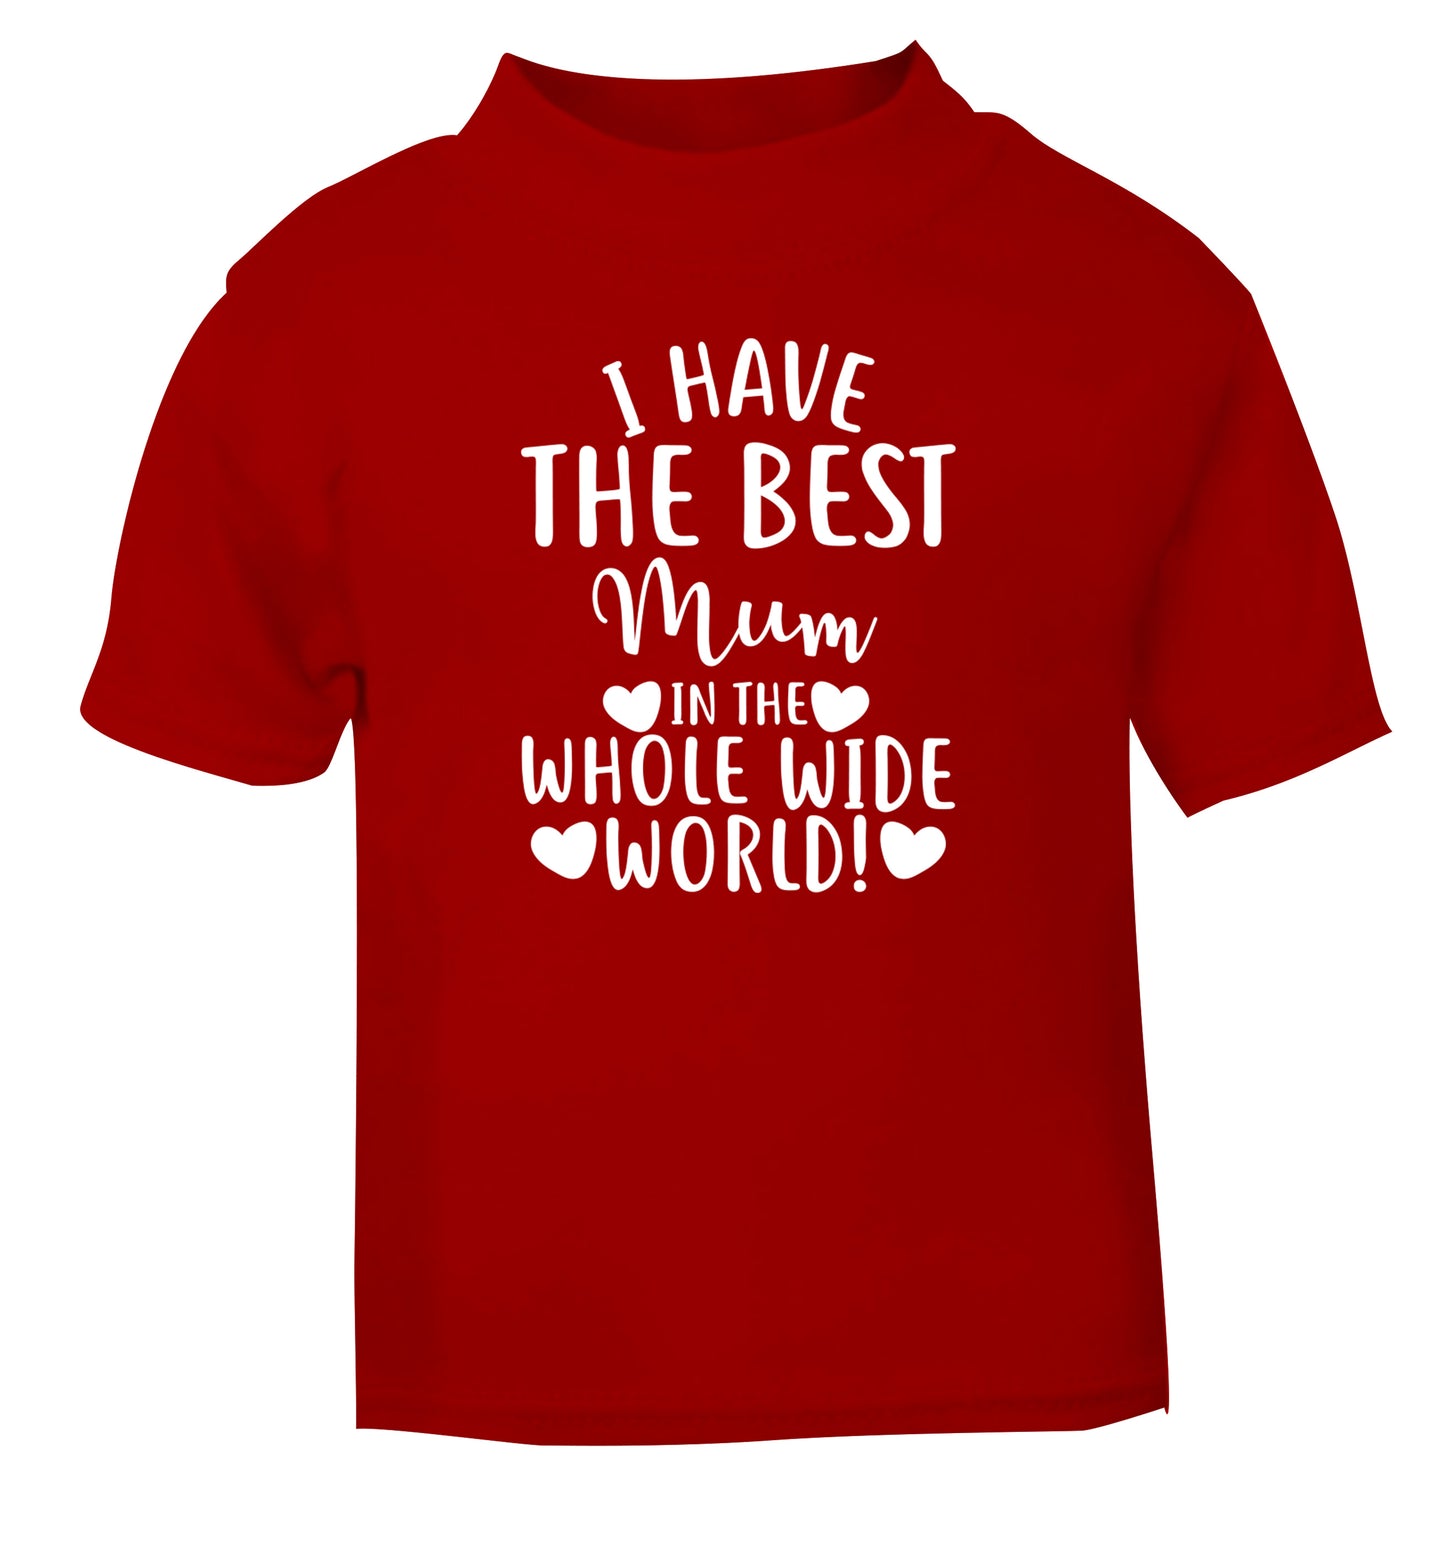 I have the best mum in the whole wide world! red Baby Toddler Tshirt 2 Years